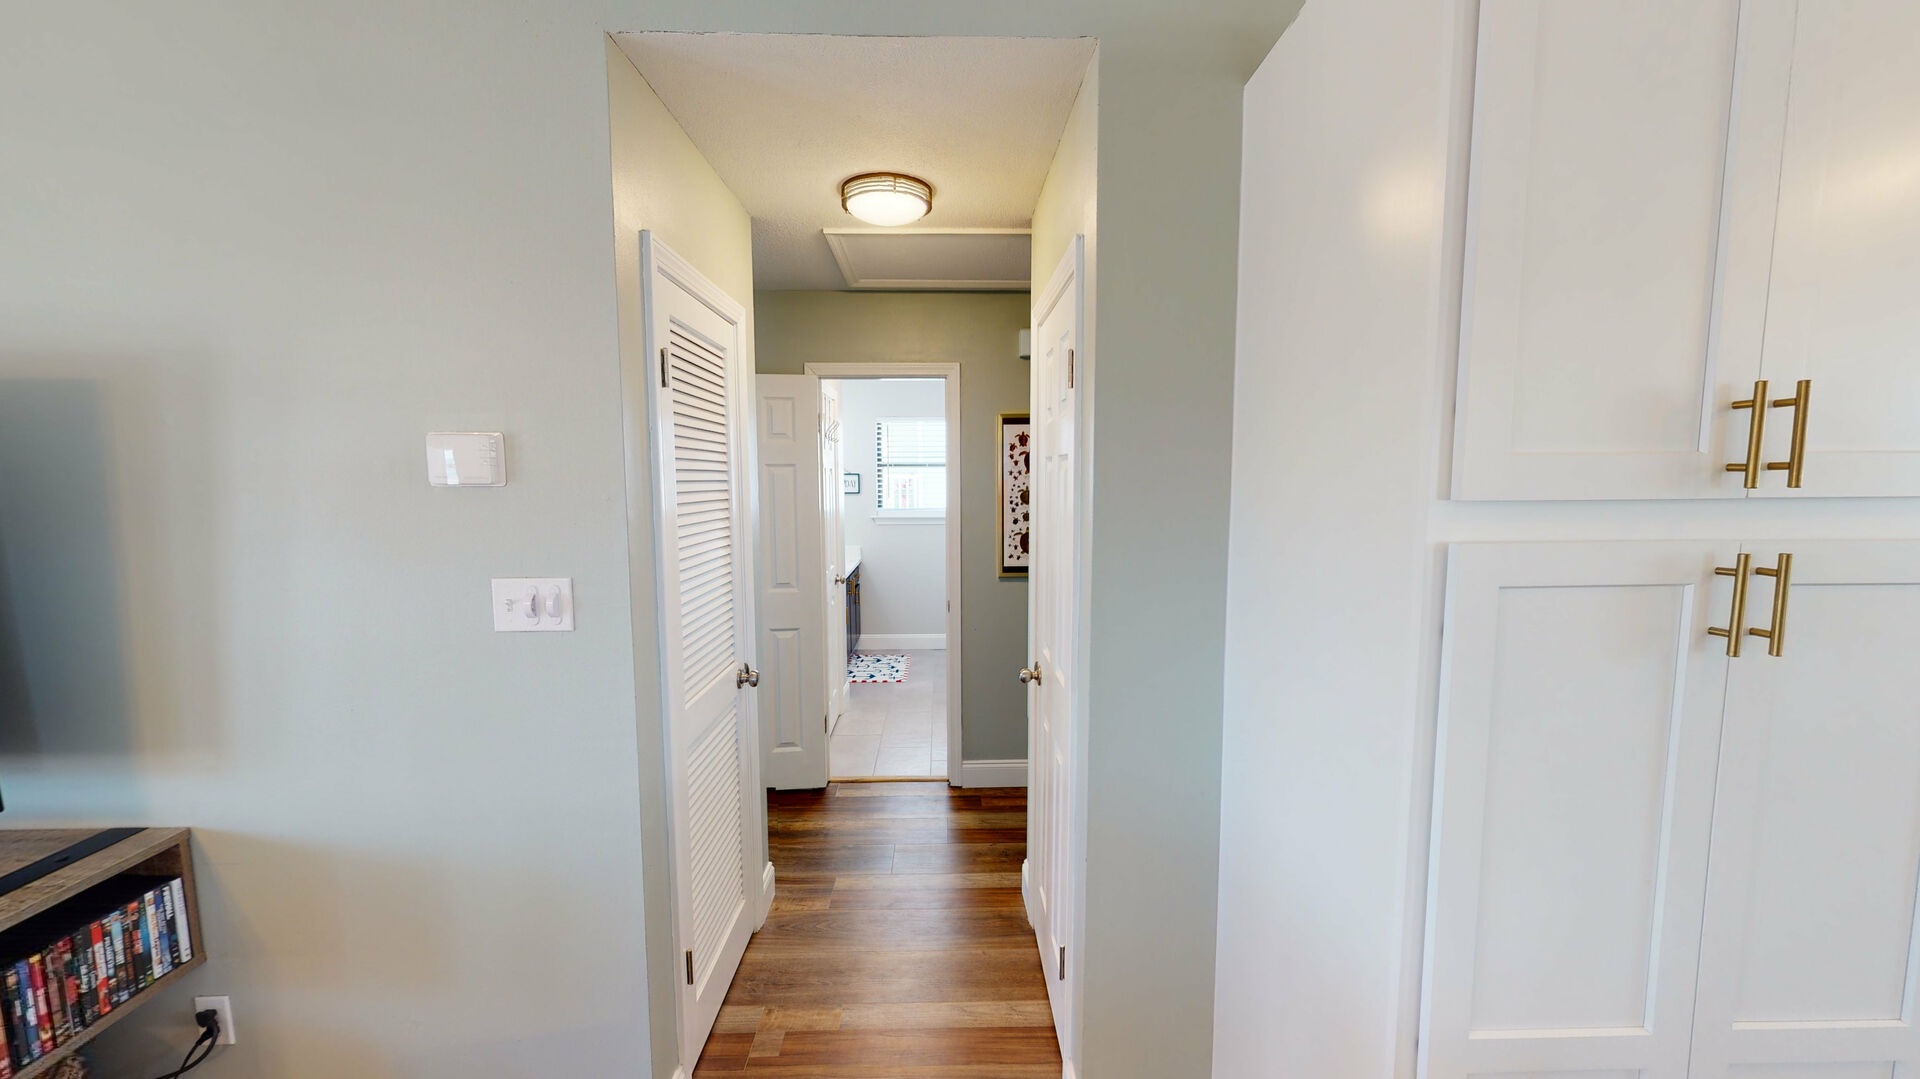 Hallway leading from the kitchen/living room into bedrooms 2,3, & hall bath.